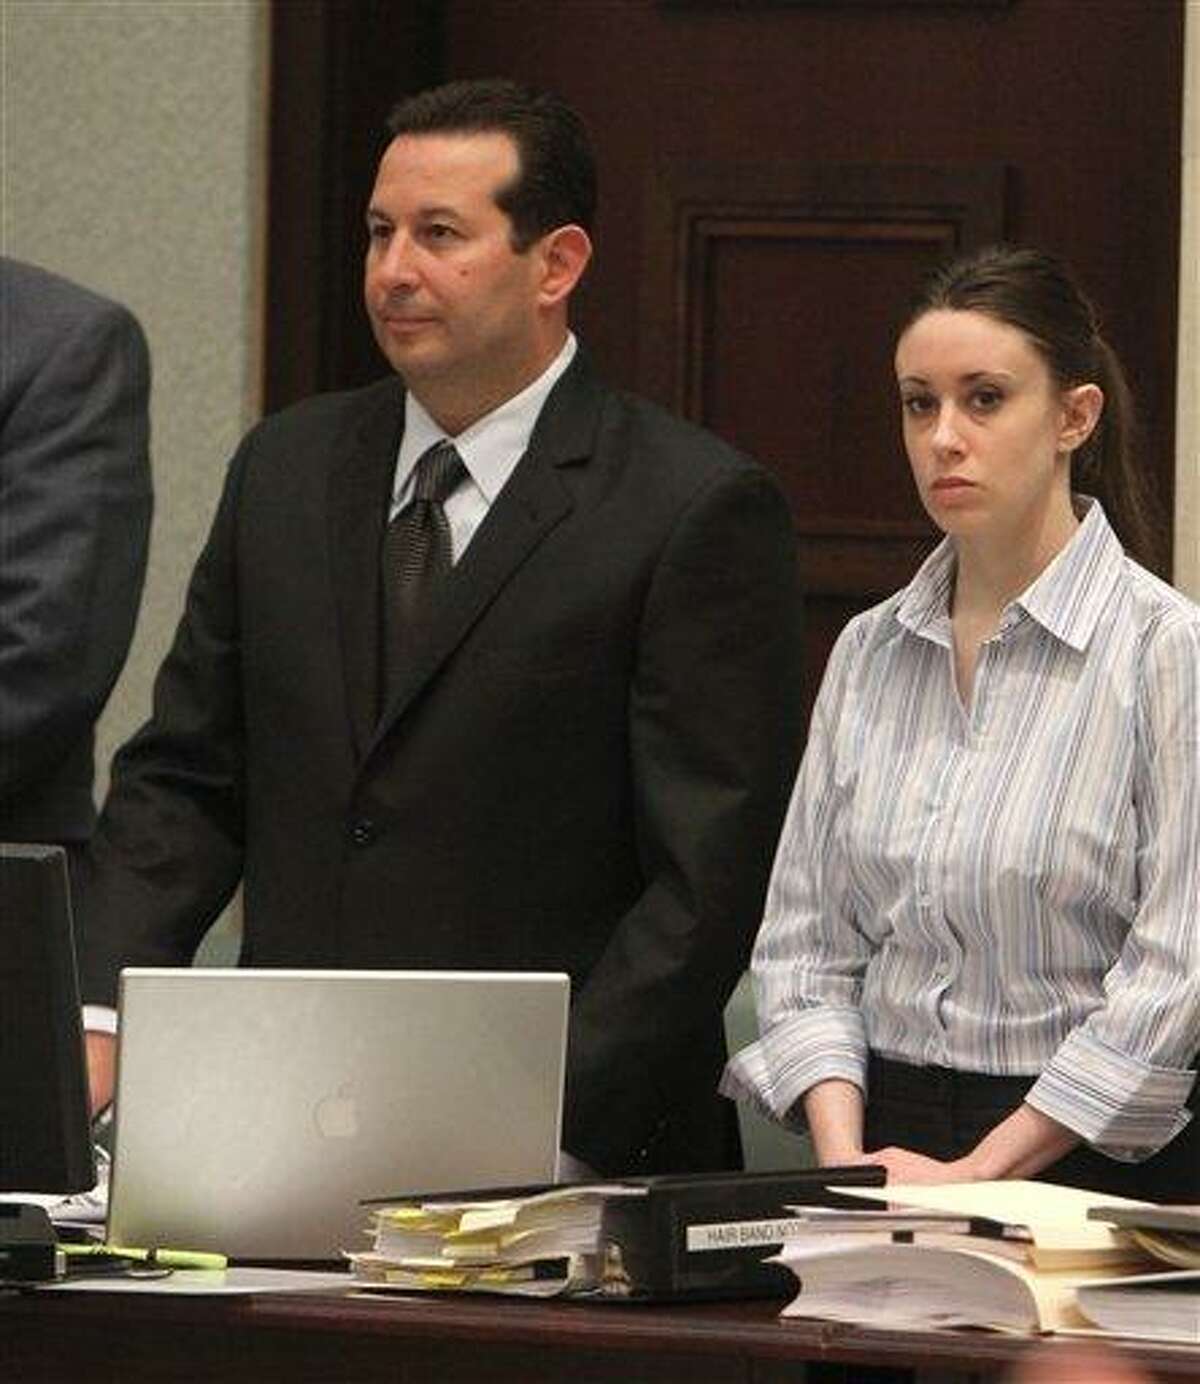 Attorney Jose Baez and his client Casey Anthony stand as the jury enters to courtroom for Anthony's trial at the Orange County Courthouse on Saturday, June 4, 2011 in Orlando, Fla. Anthony, 25, is charged with murder in the 2008 death of her daughter Caylee. If convicted, she could be sentenced to death. (AP Photo/Red Huber, Pool)